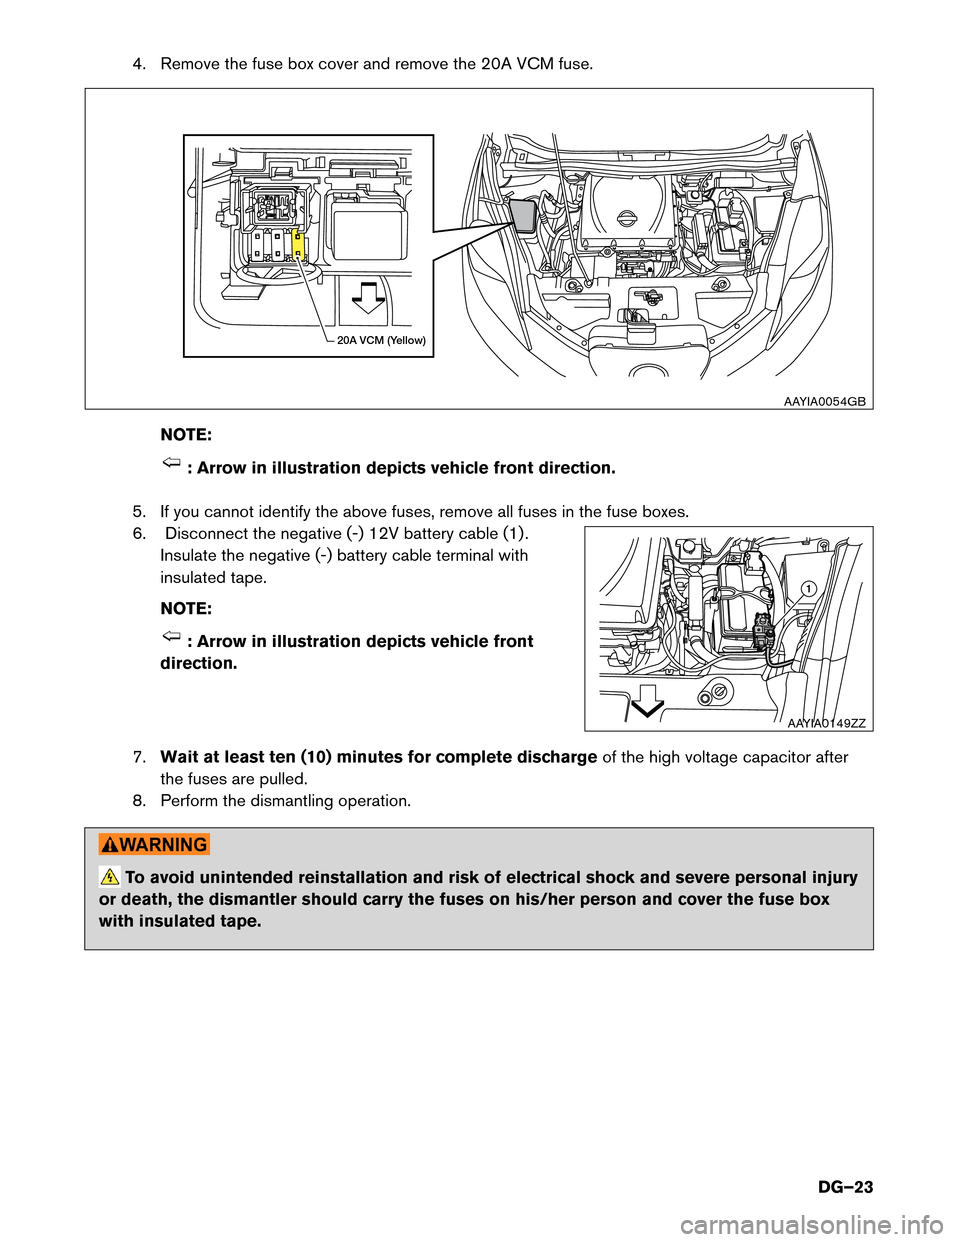 NISSAN LEAF 2014 1.G Dismantling Guide 4. Remove the fuse box cover and remove the 20A VCM fuse.
NO TE: : Arrow in illustration depicts vehicle front direction.
5.

If you cannot identify the above fuses, remove all fuses in the fuse boxes